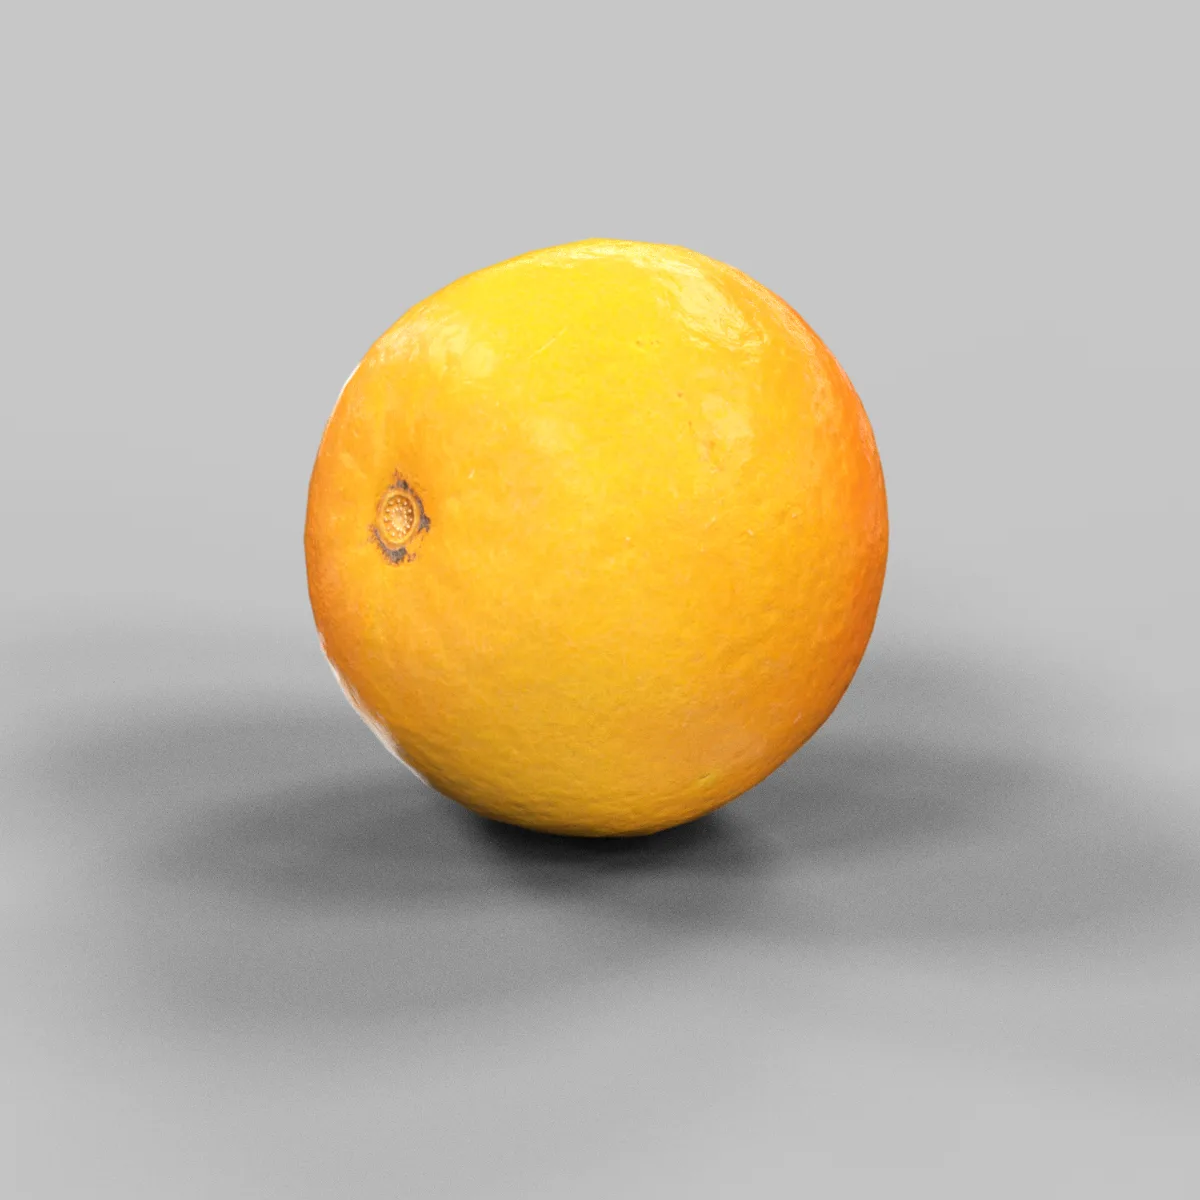 Realistic 3D Scanned Model Collection of 25 Fruits and Vegetables with OBJ Format and 2k JPG Textures